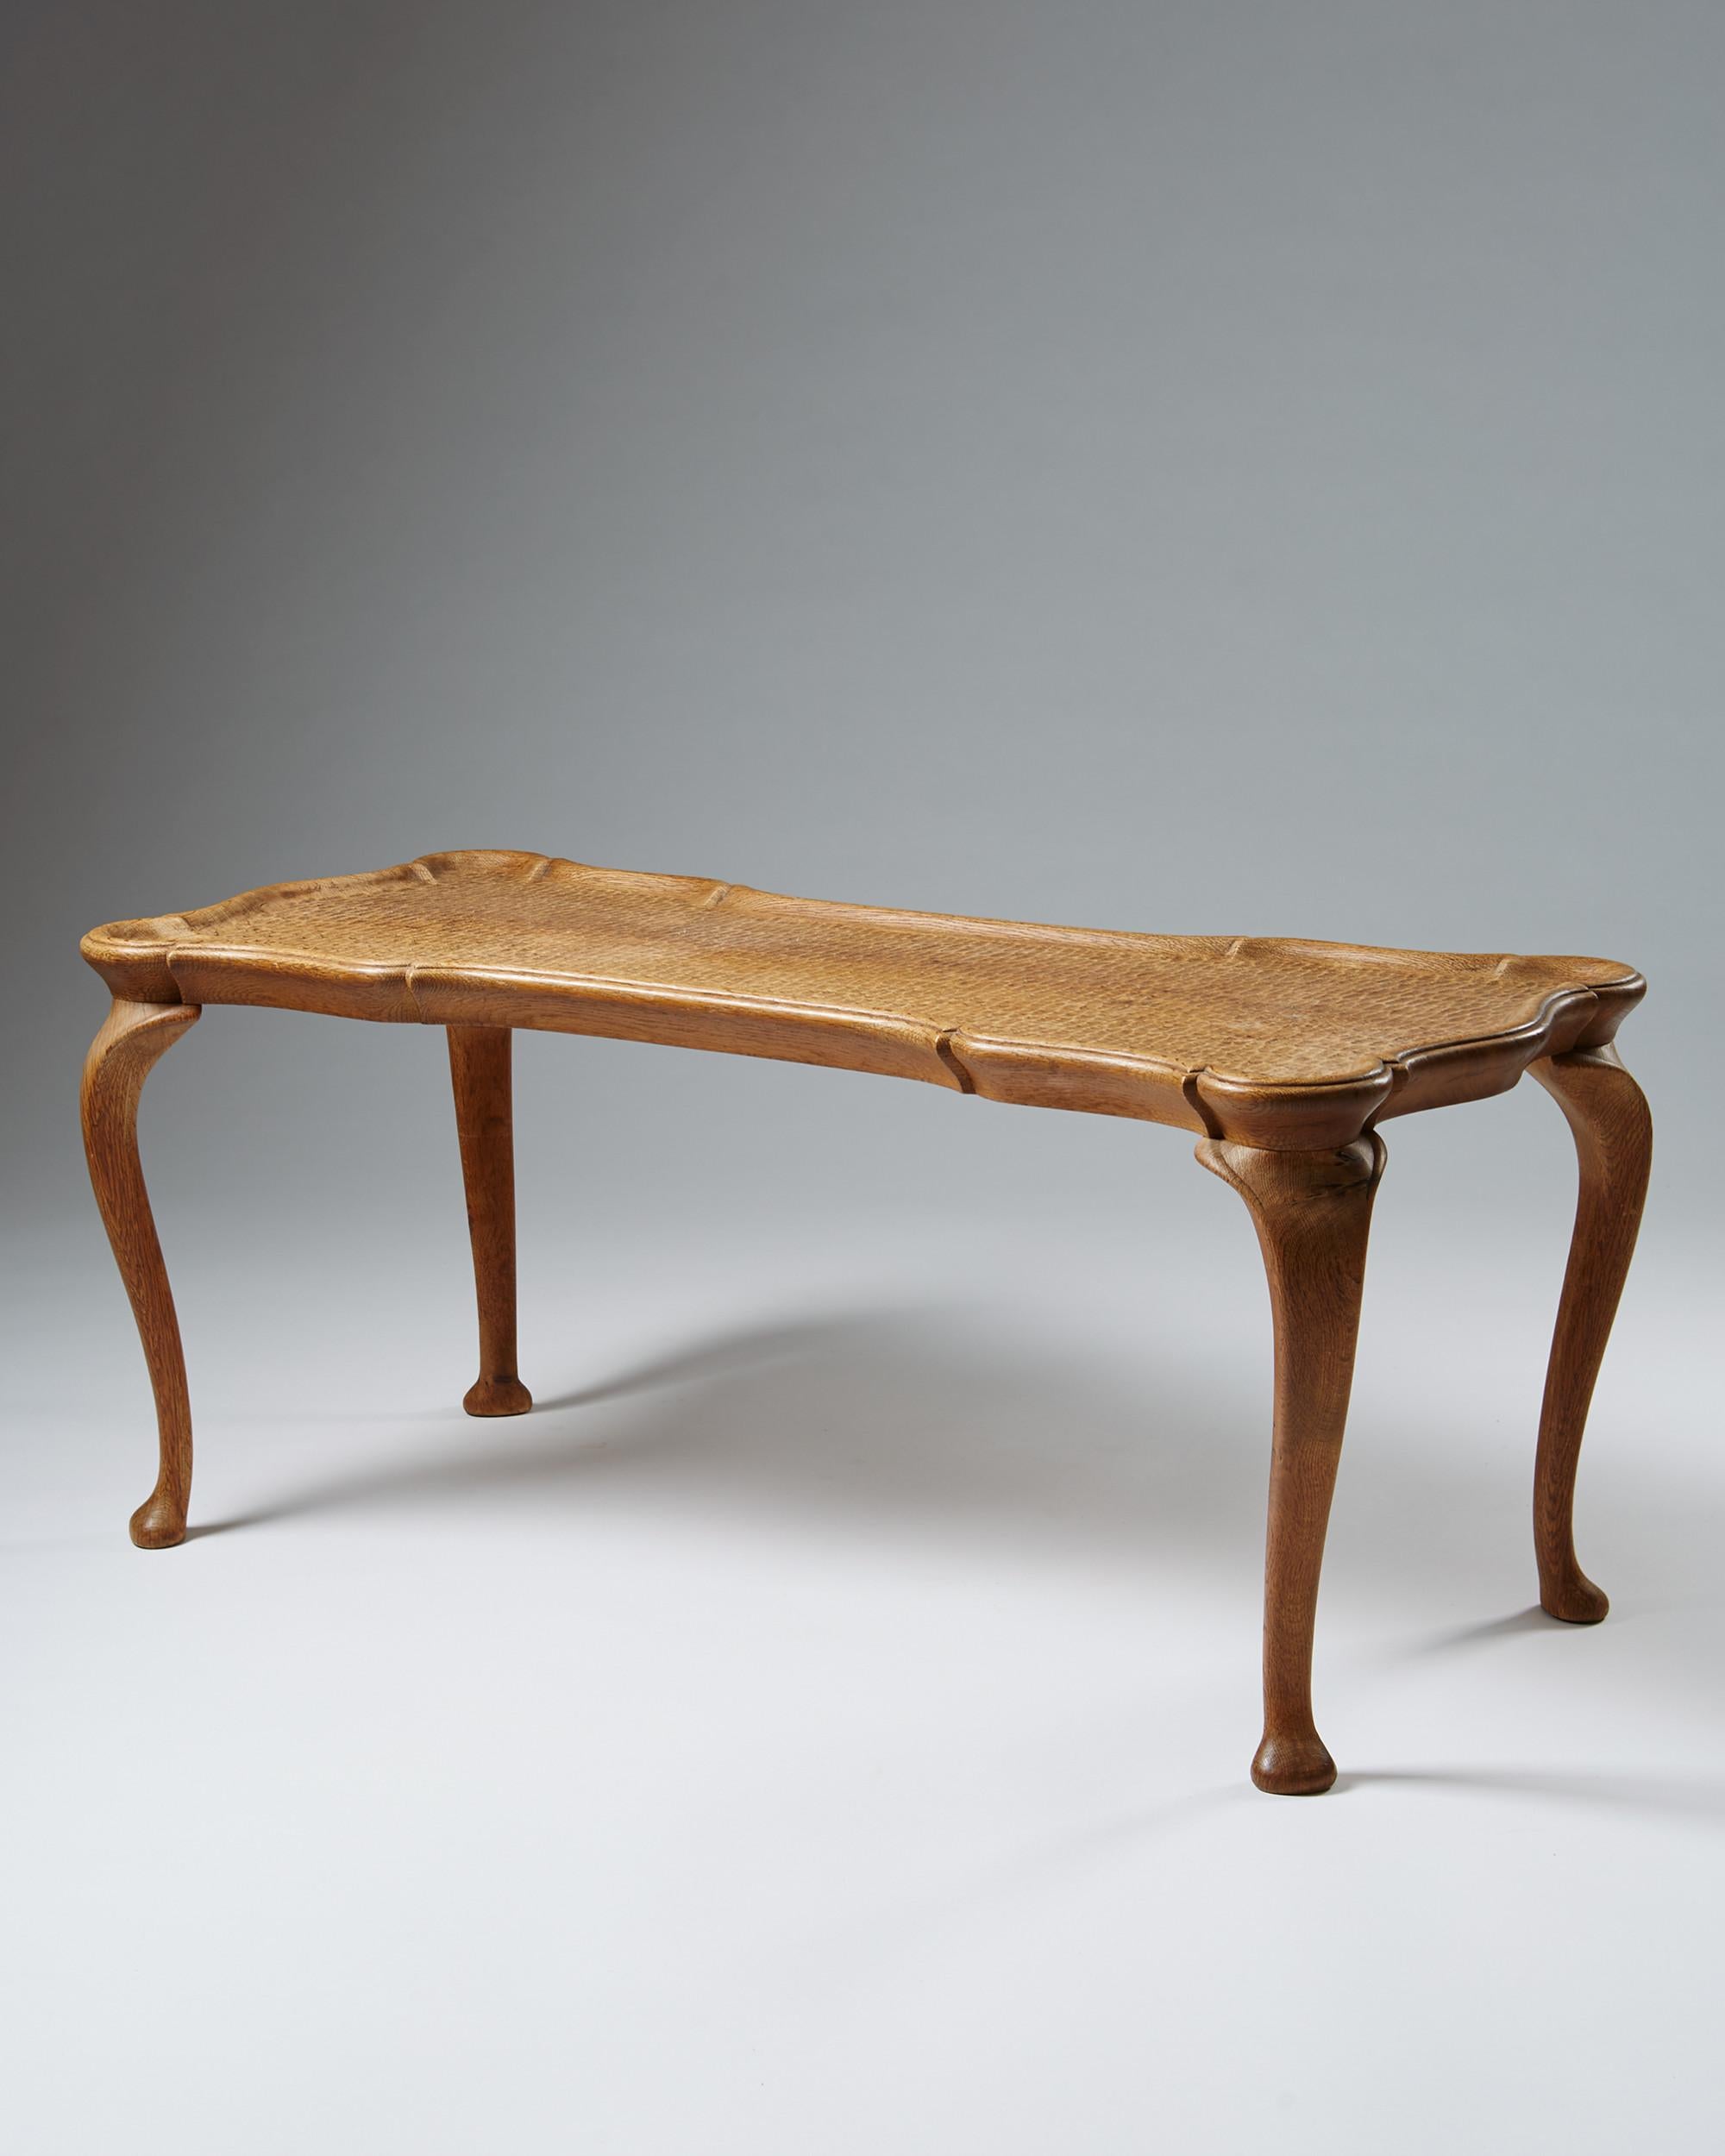 Scandinavian Modern Occasional Table Attributed to Frits Henningsen, Denmark 1940s For Sale